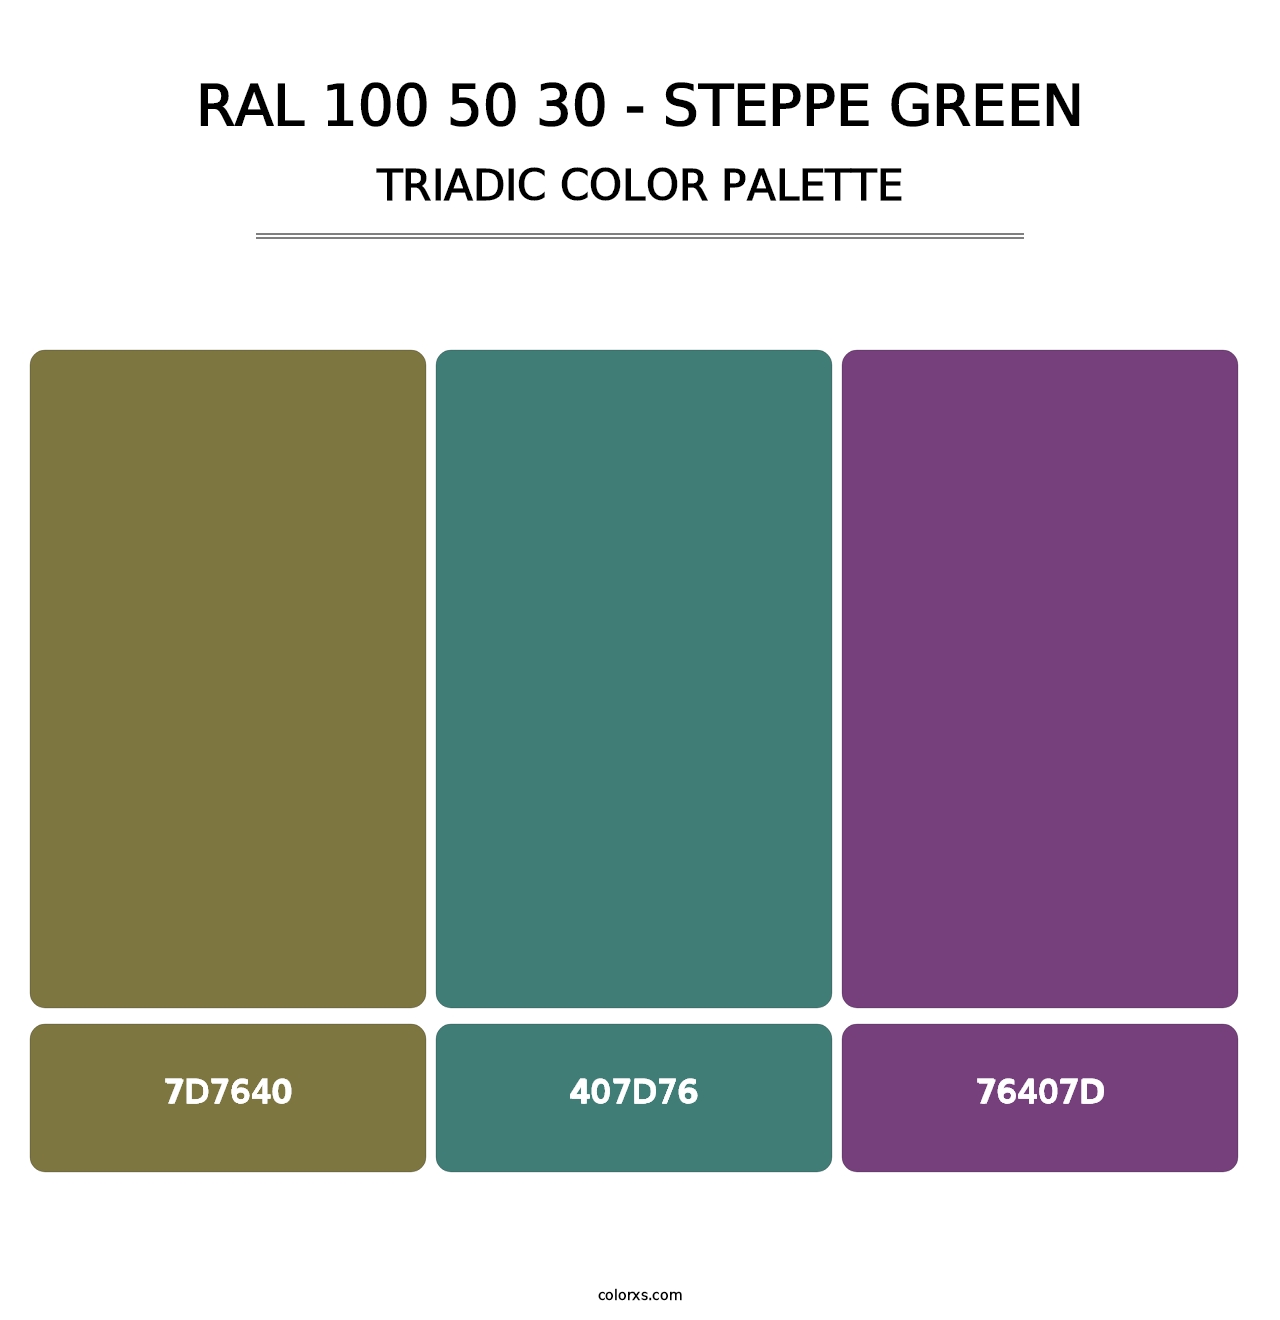 RAL 100 50 30 - Steppe Green - Triadic Color Palette